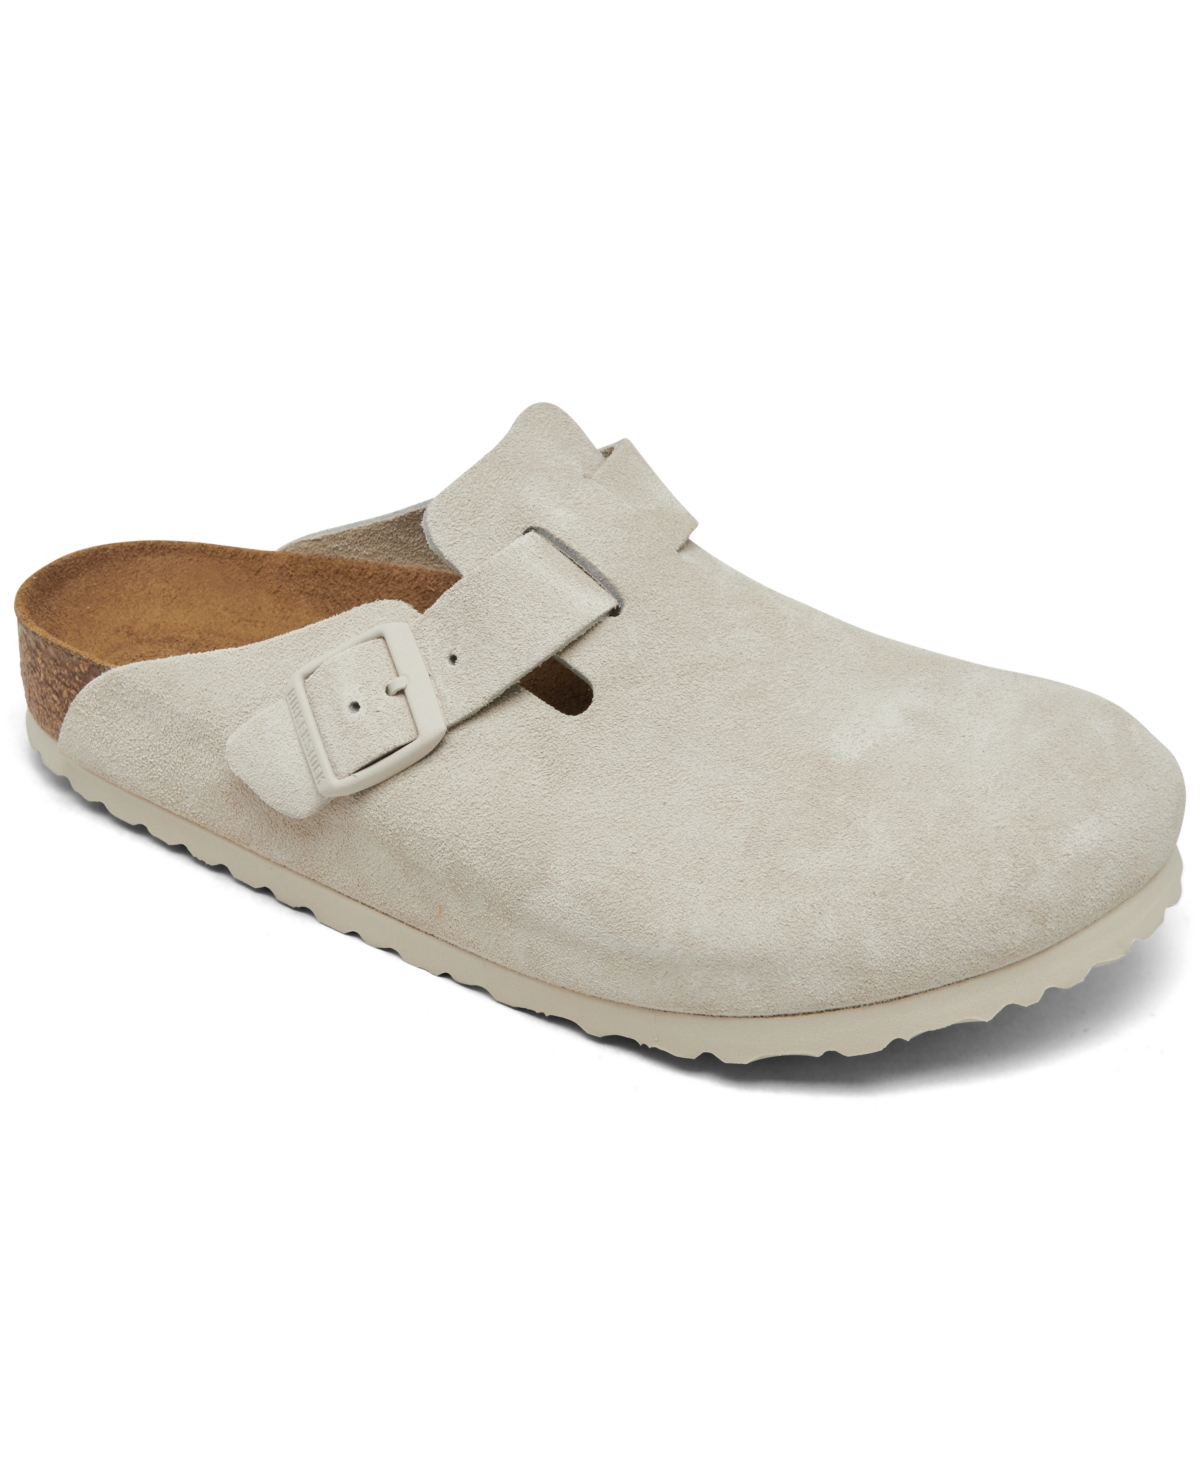 Men's Boston Soft Footbed Suede Leather Clogs from Finish Line - White